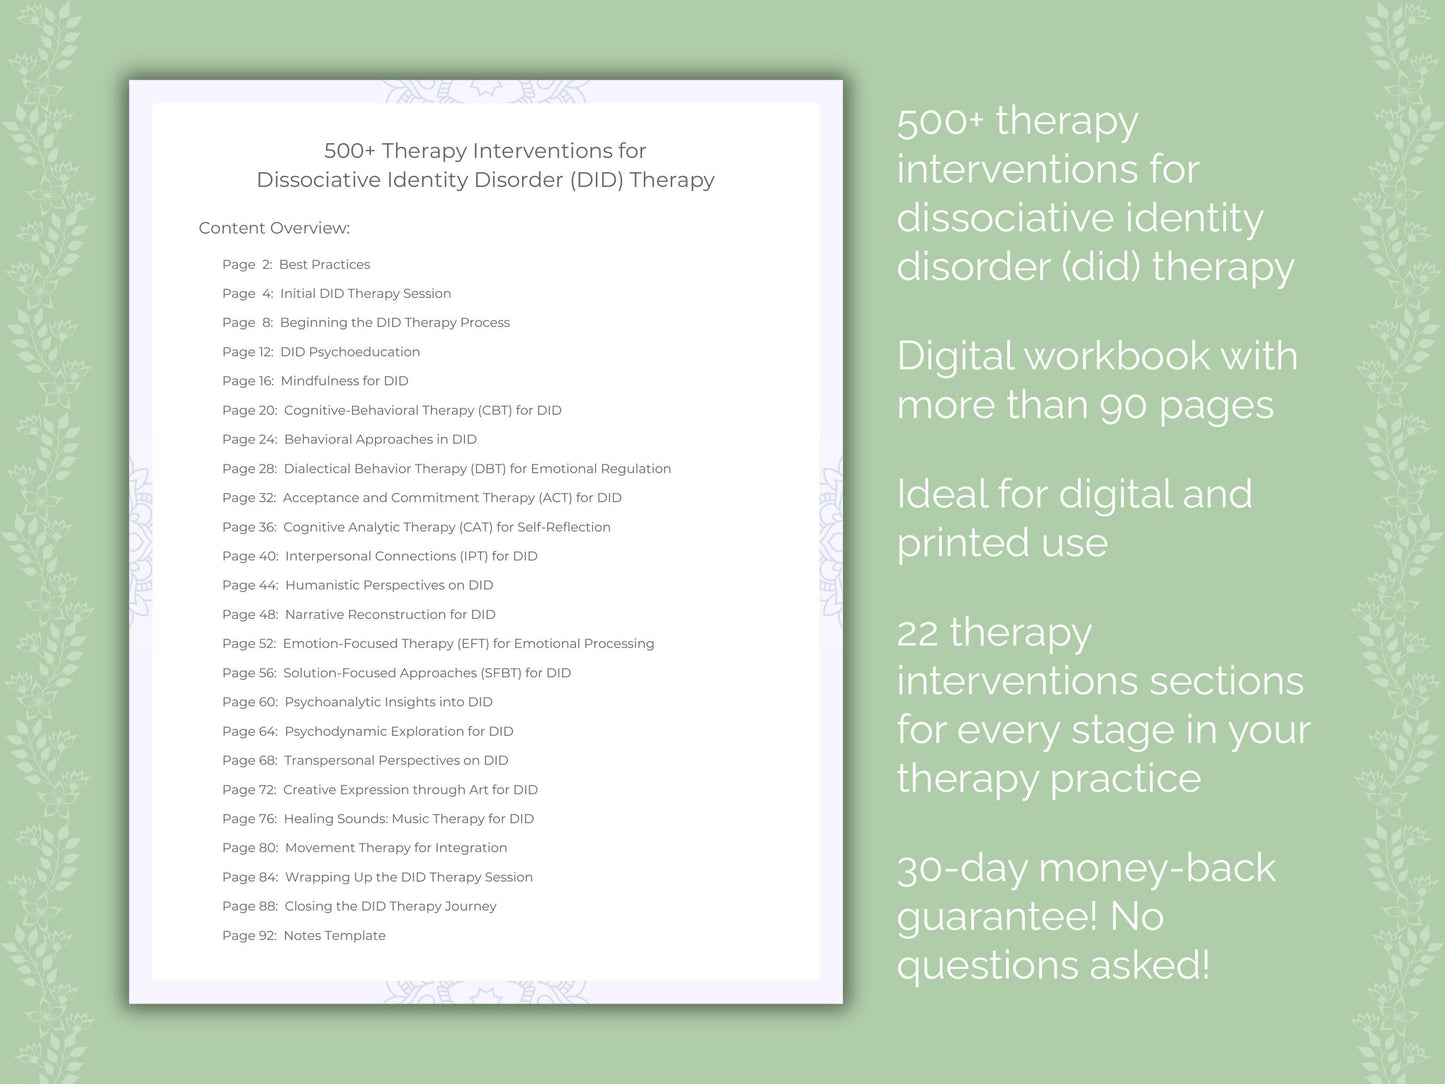 Dissociative Identity Disorder (DID) Therapy Interventions Resource